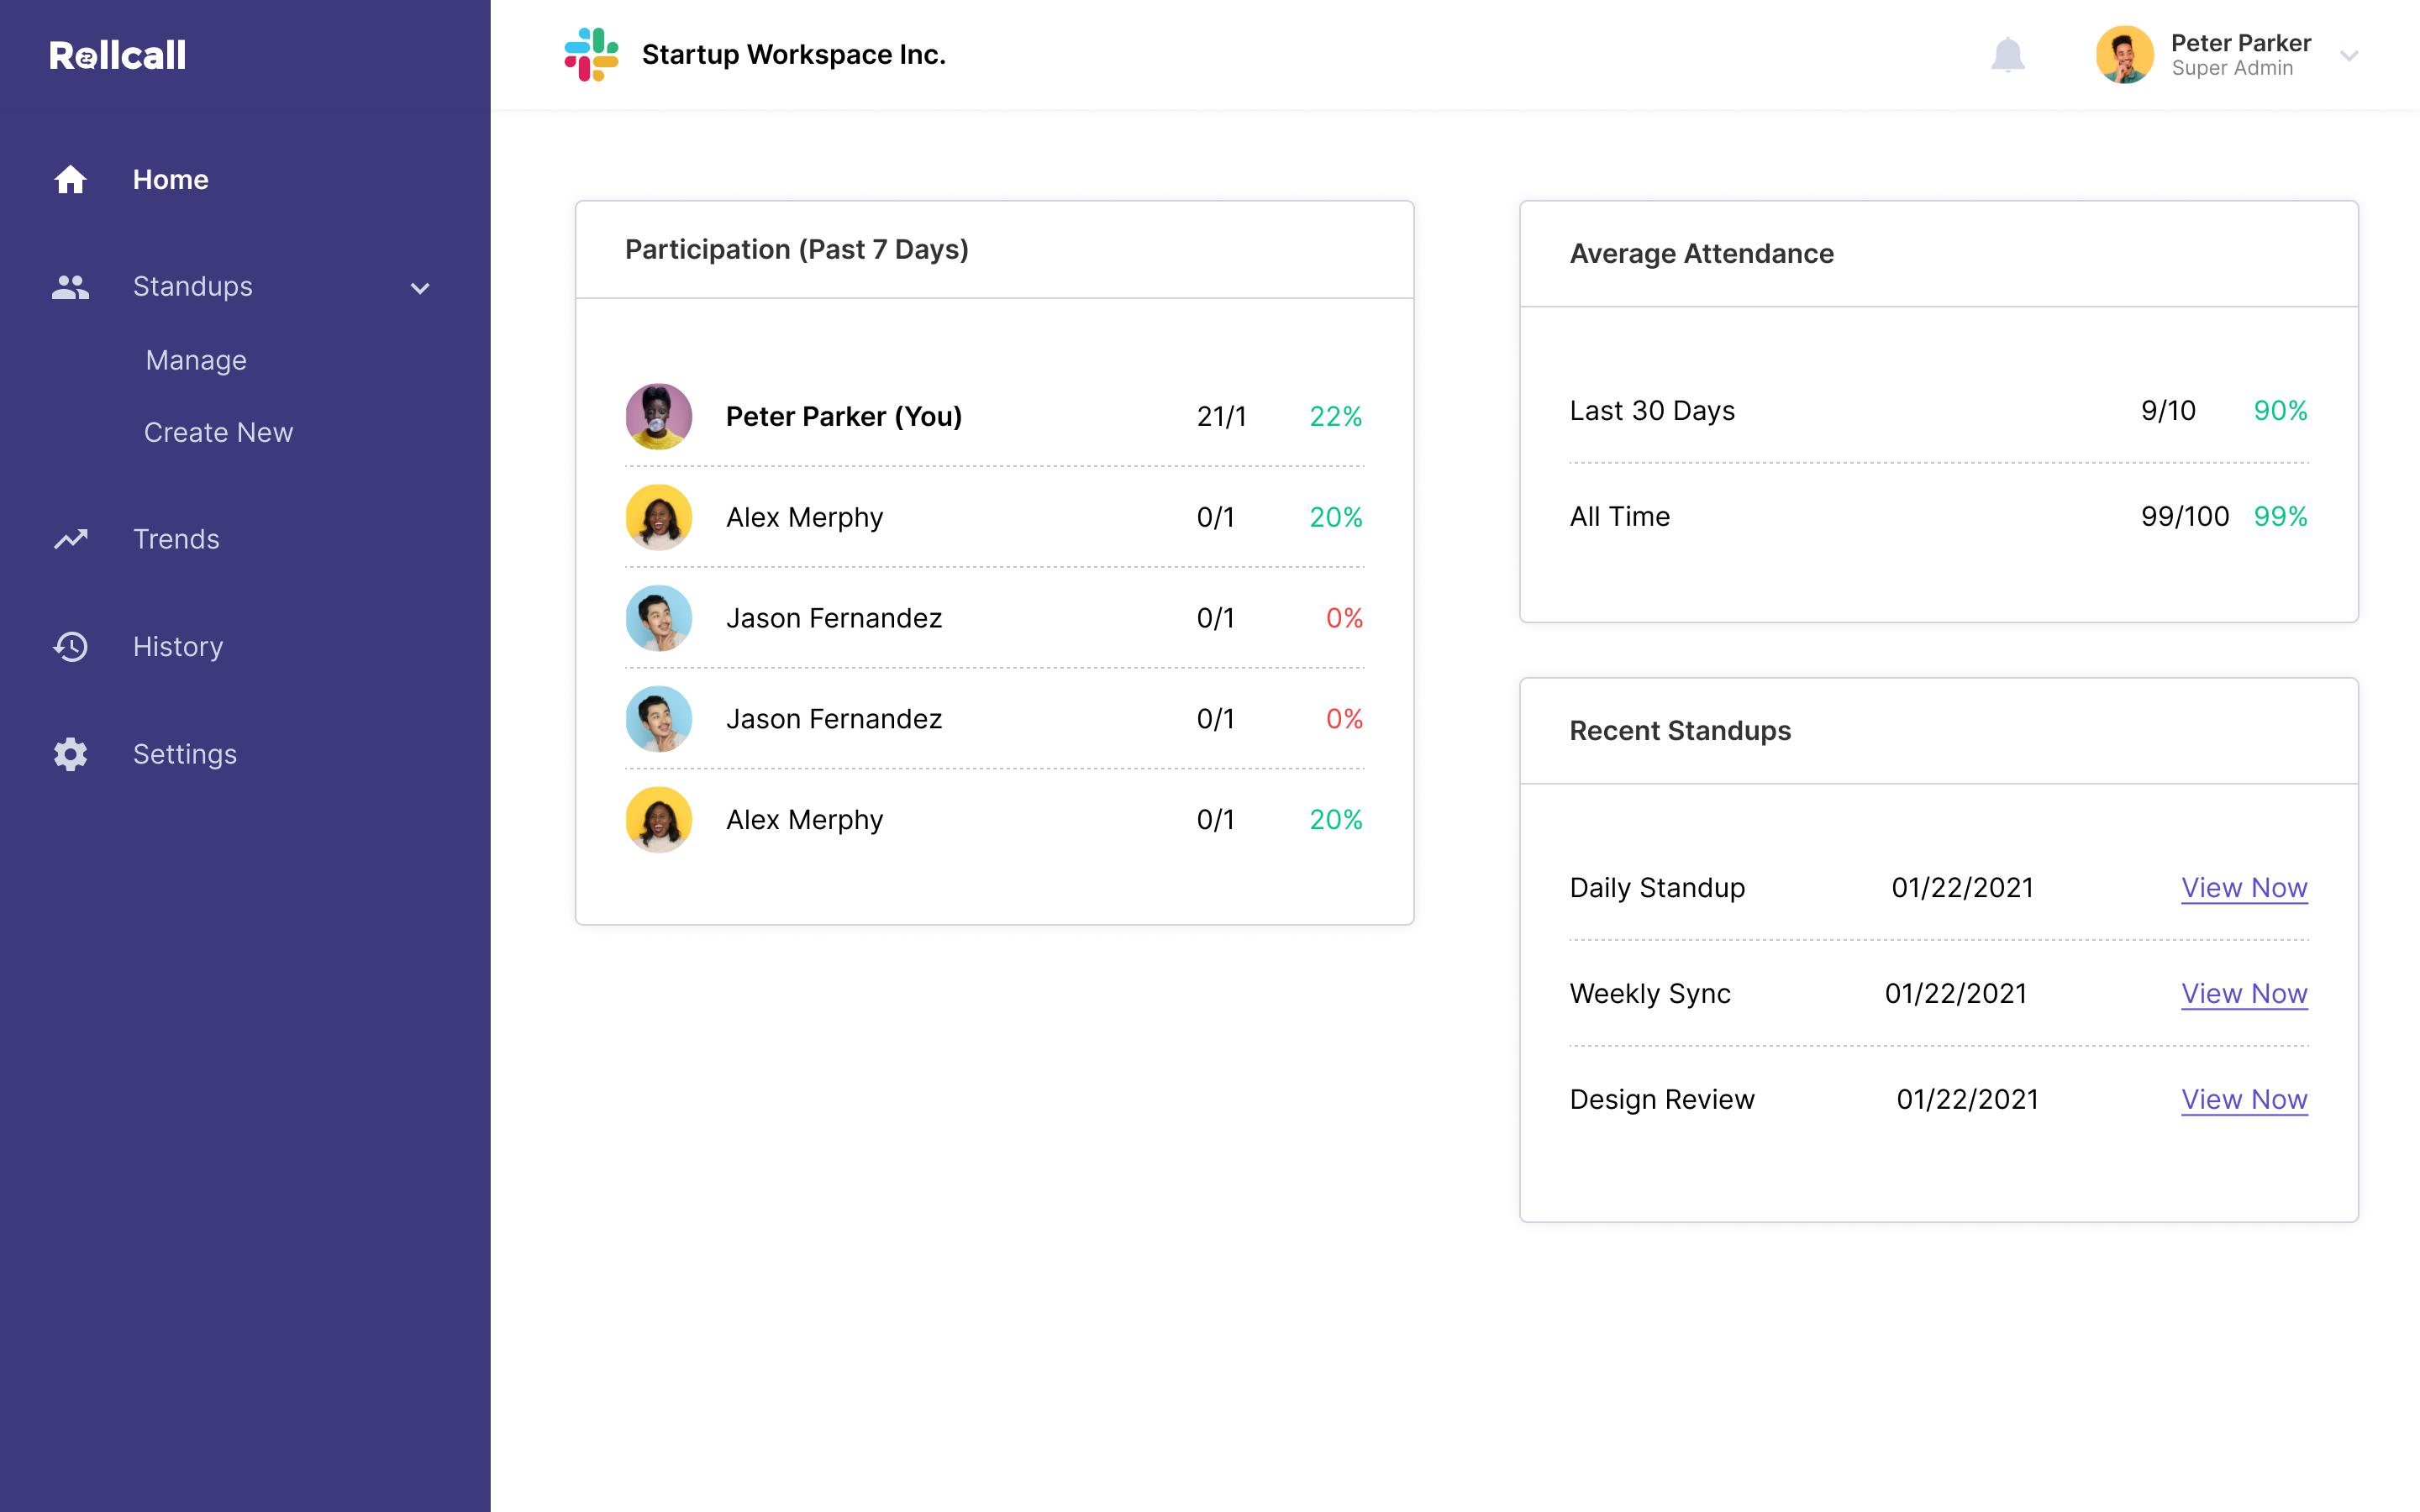 Rollcall product dashboard